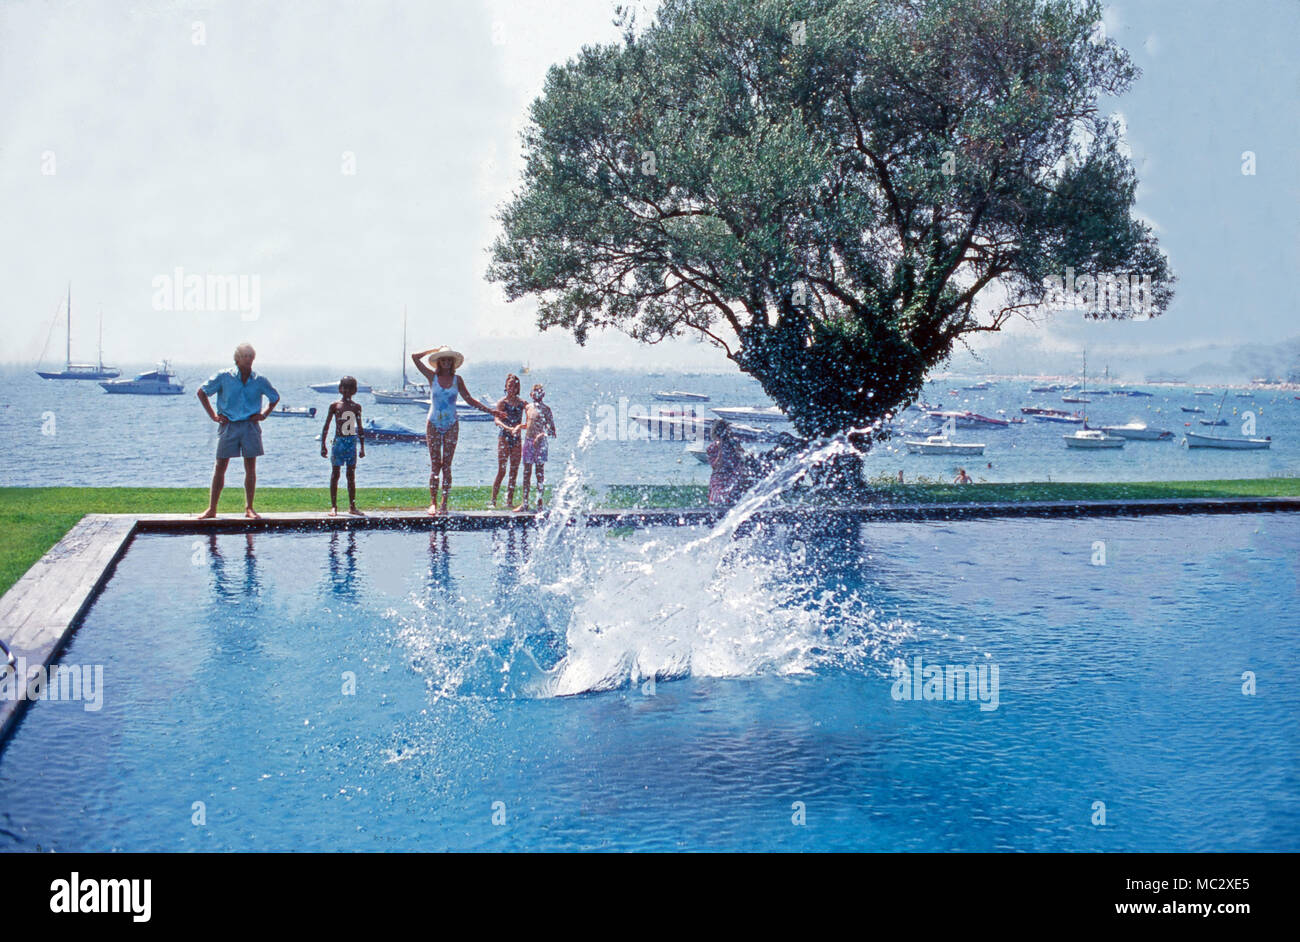 Familie Sachs hat Spaß, wenn Vater Gunter in den Pool springt. The Sachs family having fun when father Gunter jumps into the pool. Stock Photo